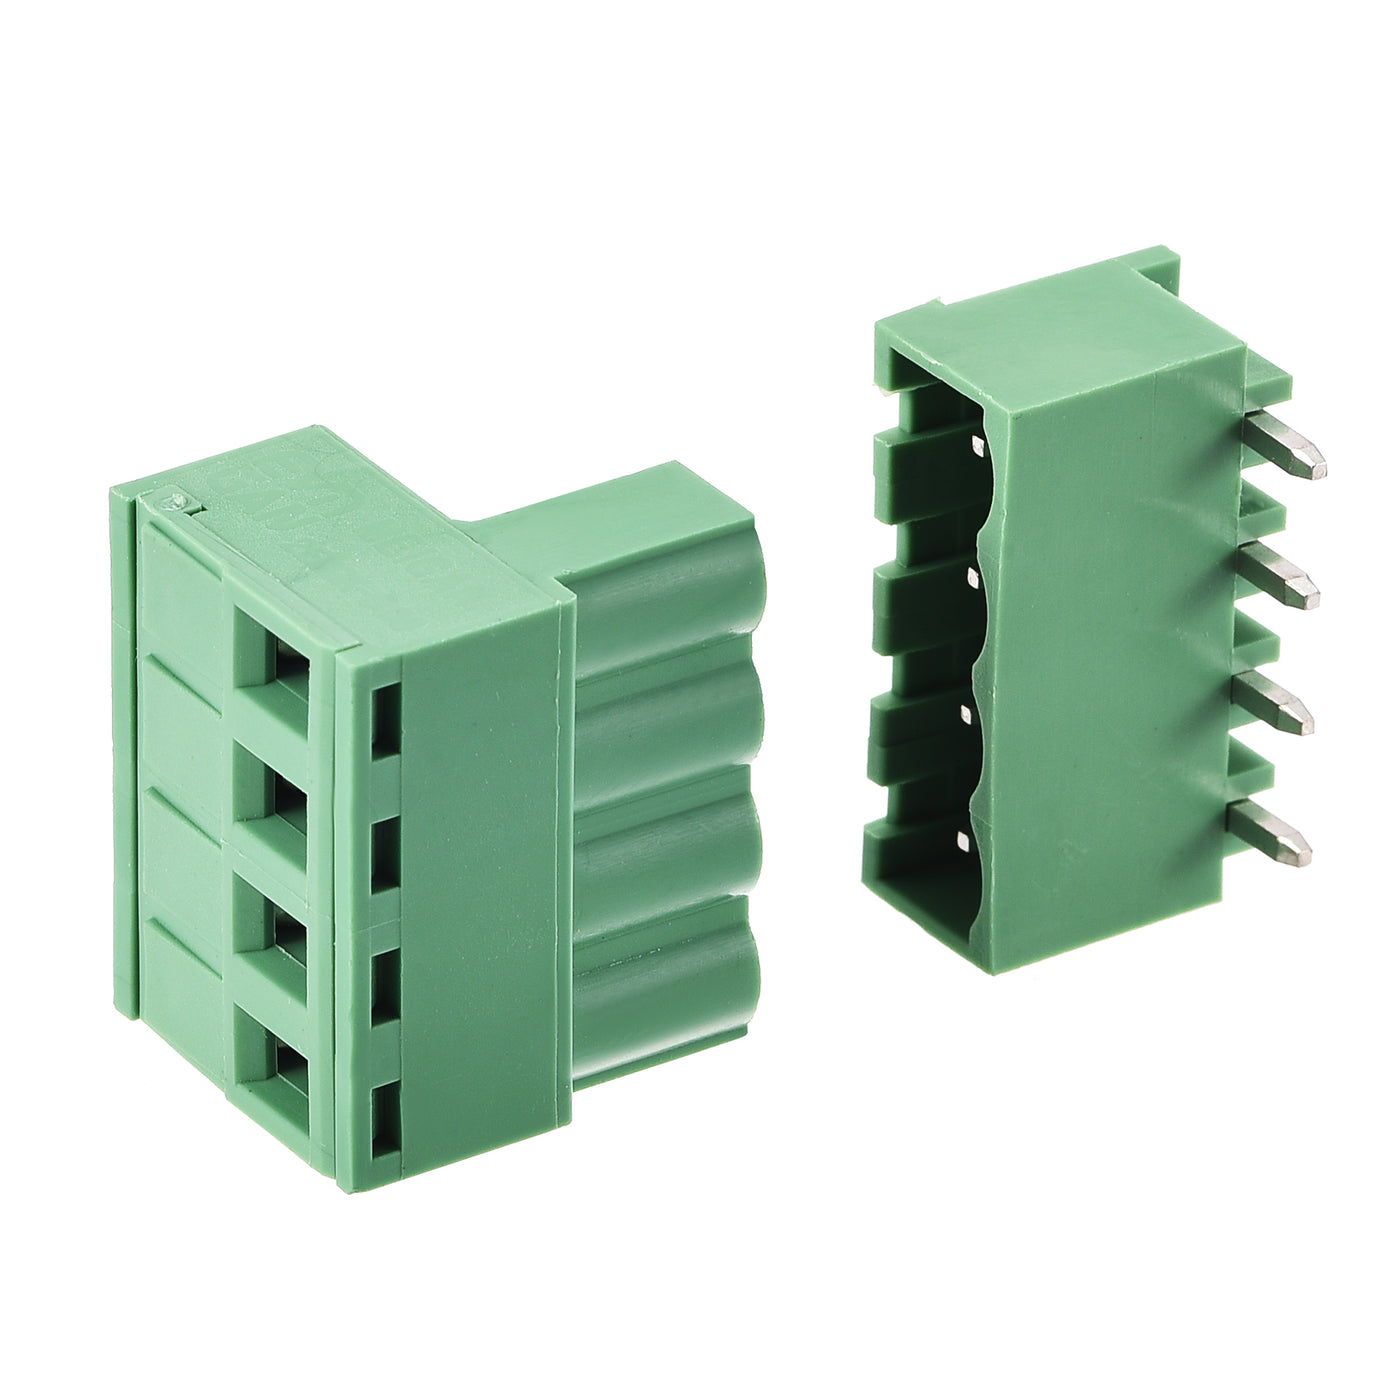 uxcell Uxcell 4-Pin 5.08mm Pitch Right Angle PCB Screw Terminal Block Connector 10 Sets